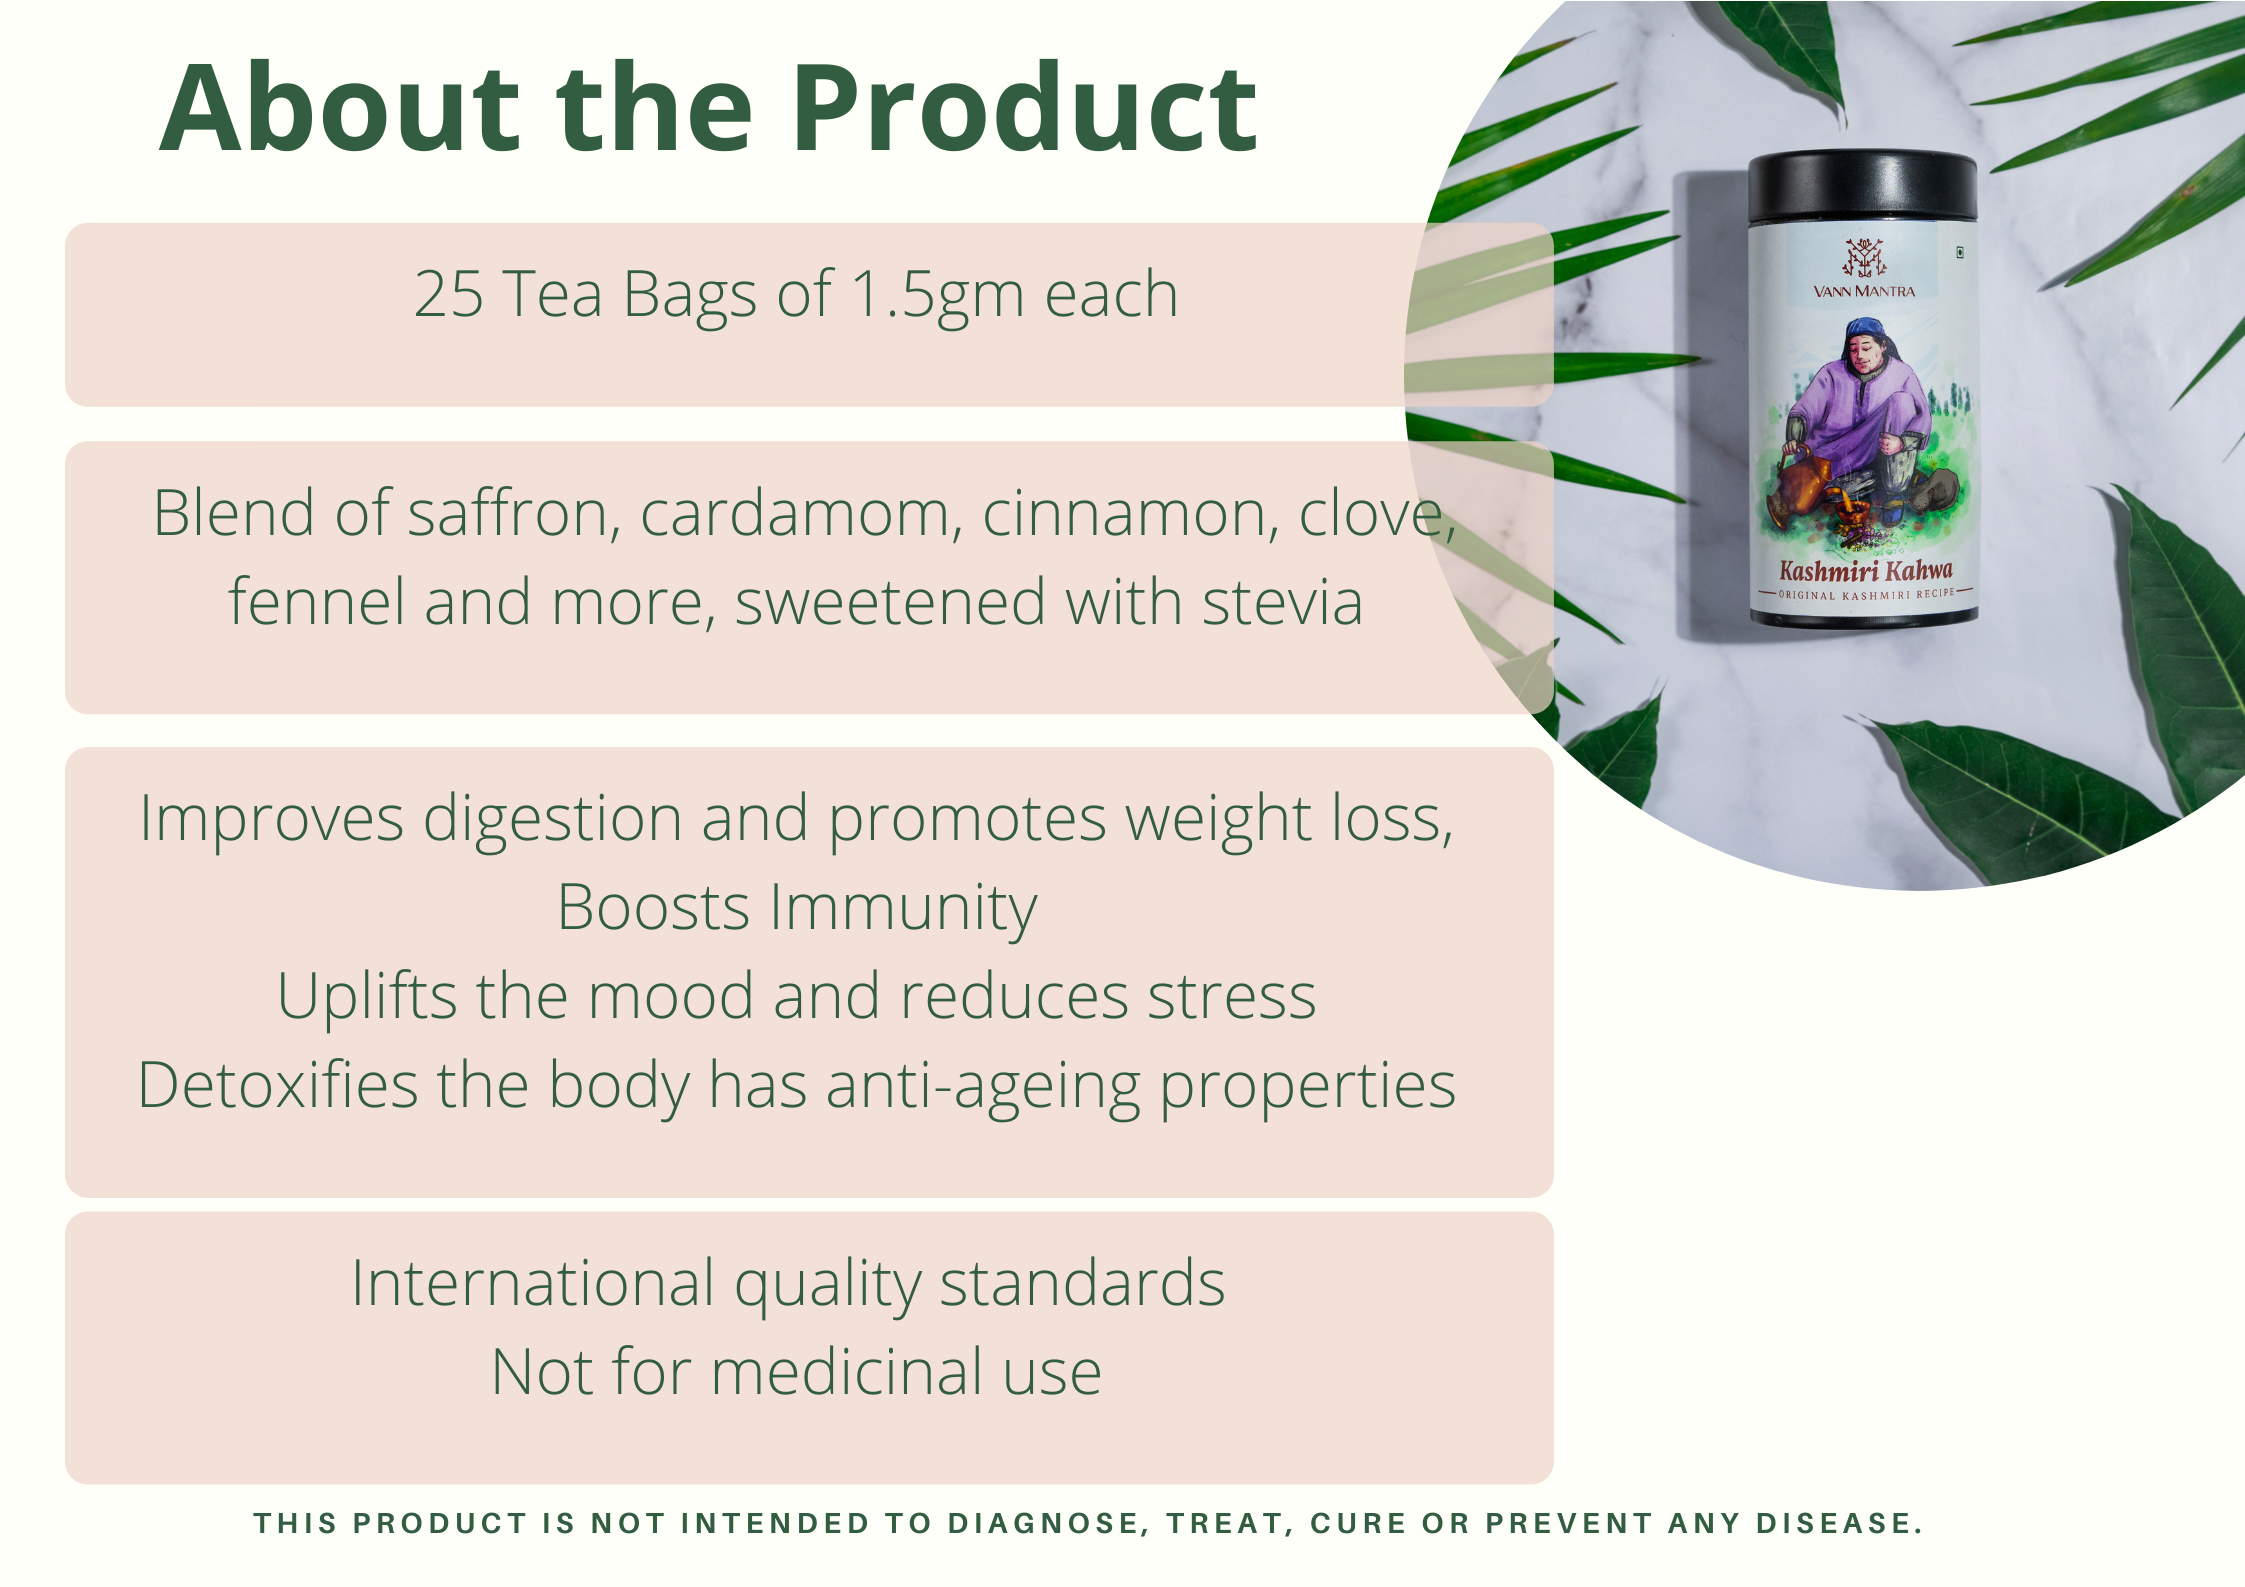 Infographic explaining the features and benefits of Kashmiri Kahwa Tea.